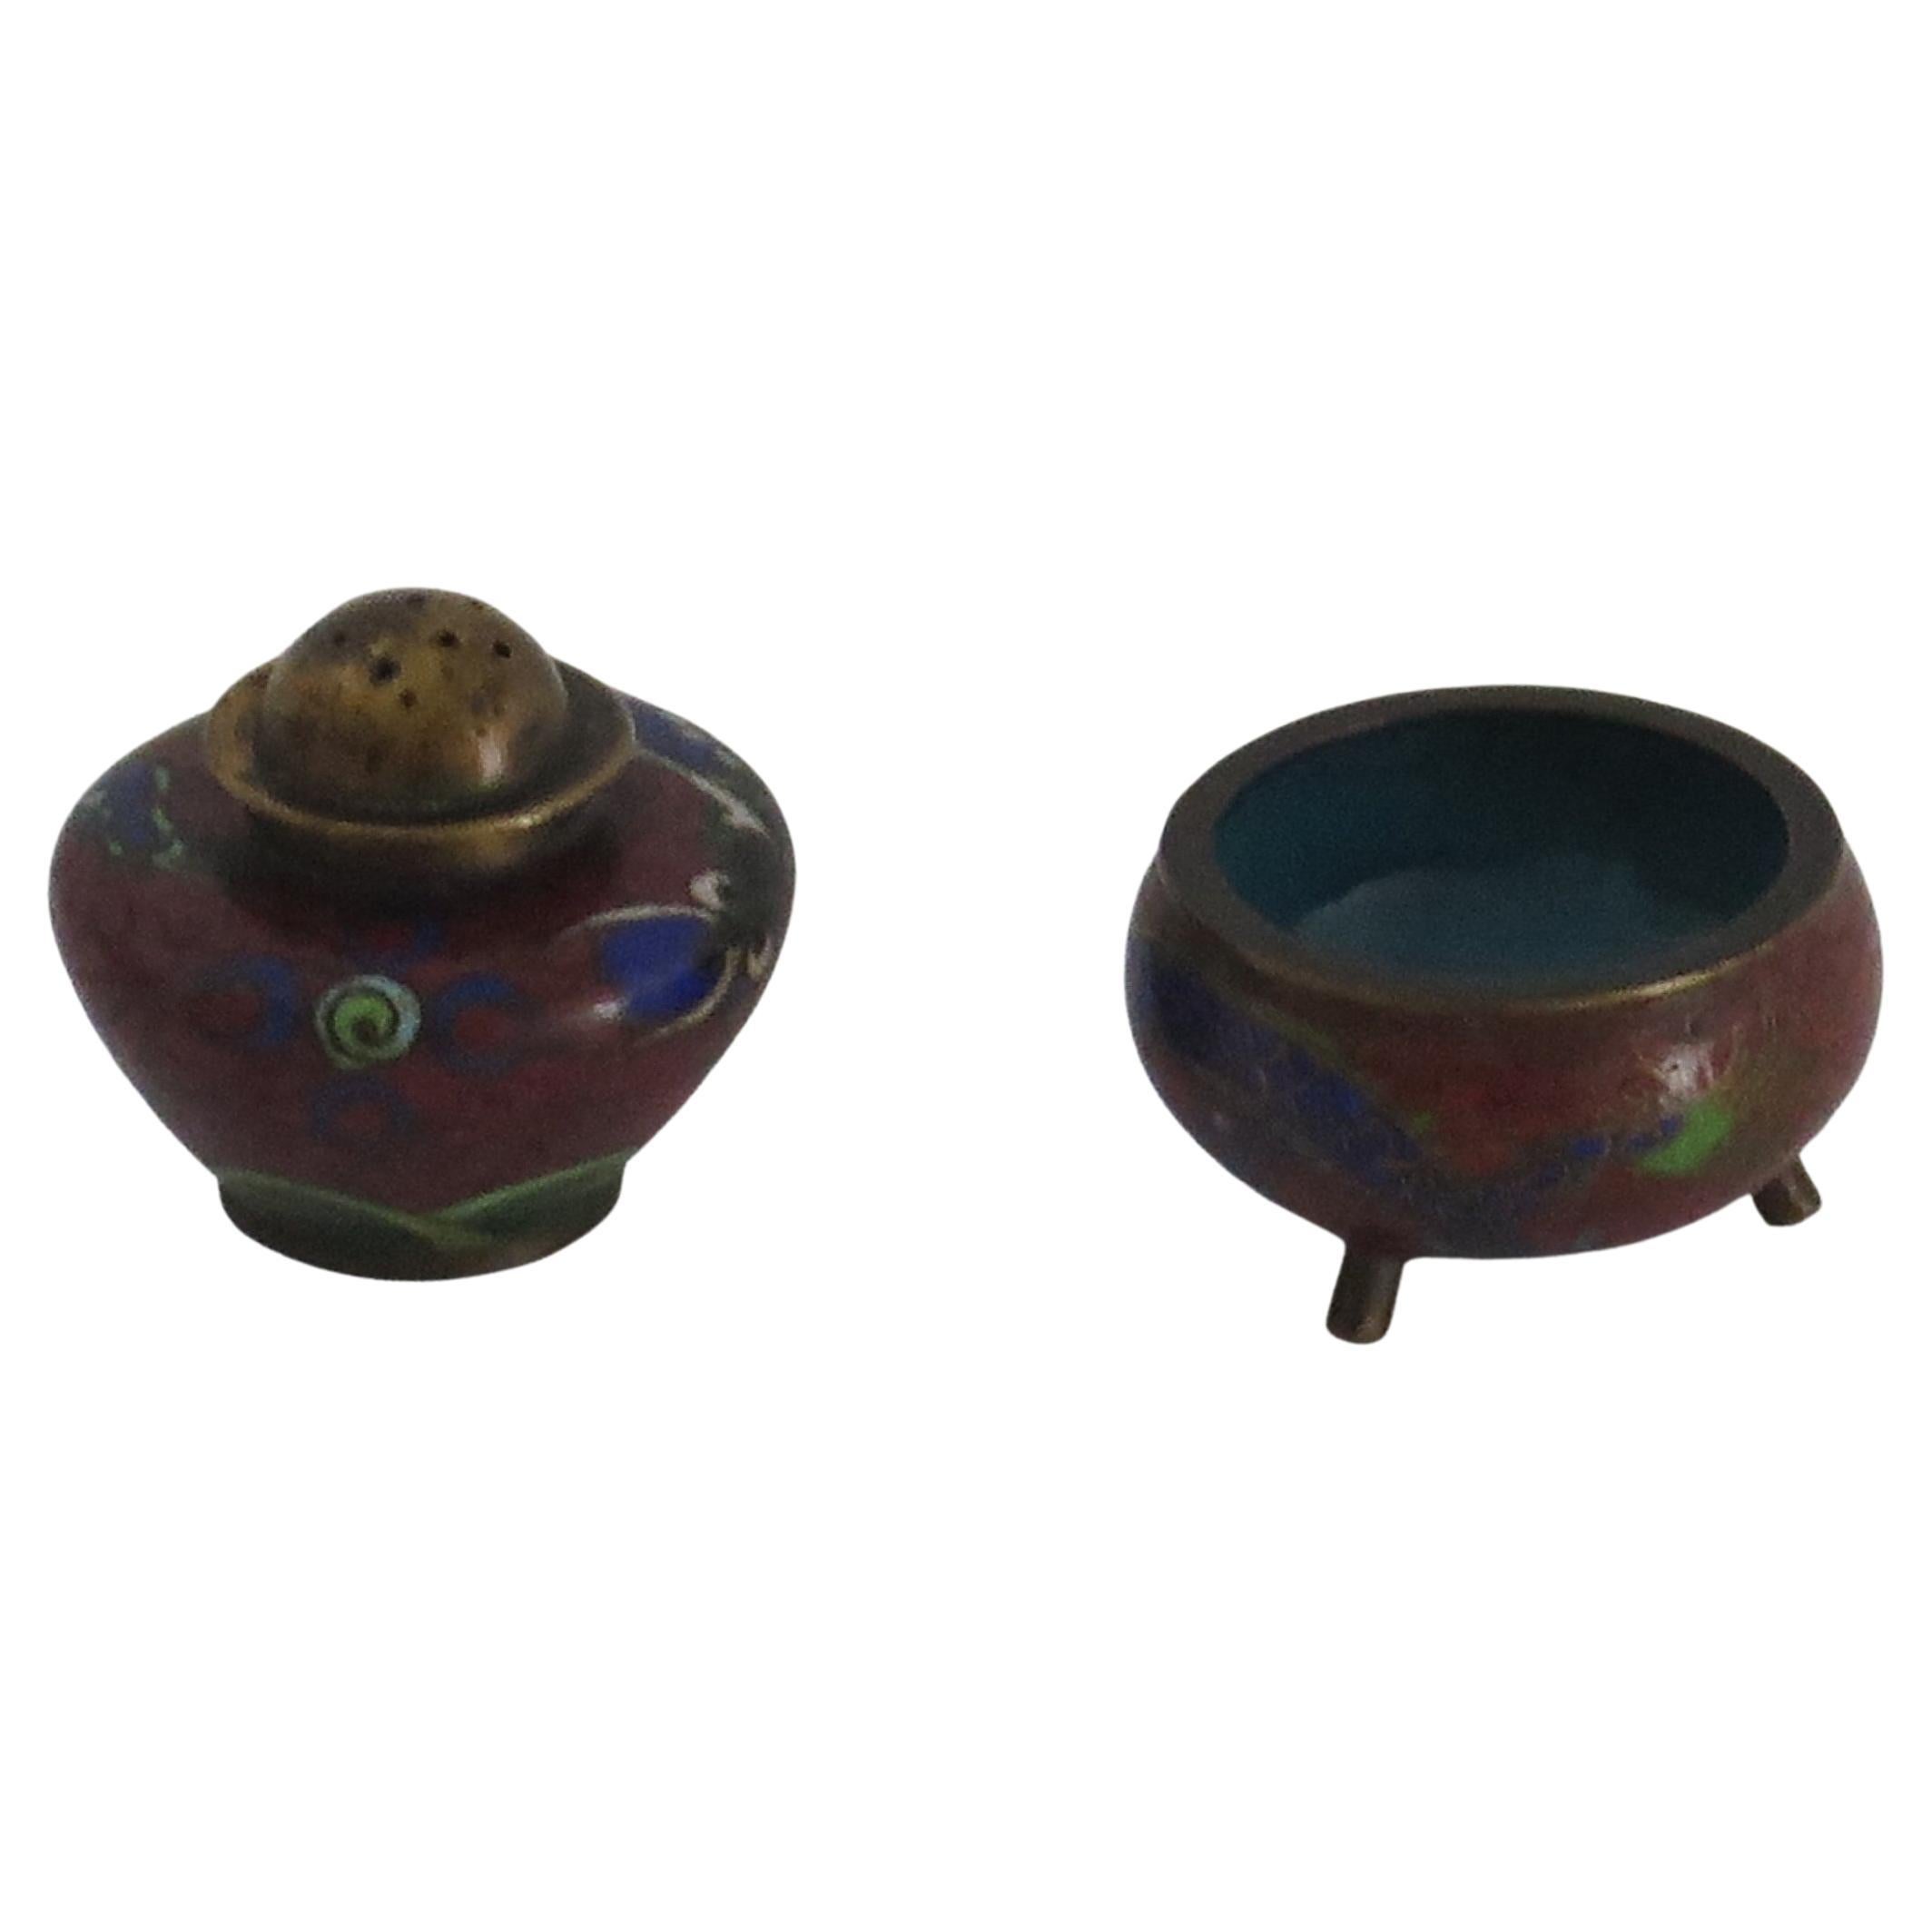 These are a well made very decorative small cloisonné salt and pepper pot, made in China and dating to the mid-19th century.

Both pieces are matching and well made from a brass / bronze metal alloy. 

The pot has a good vase shape on a low foot